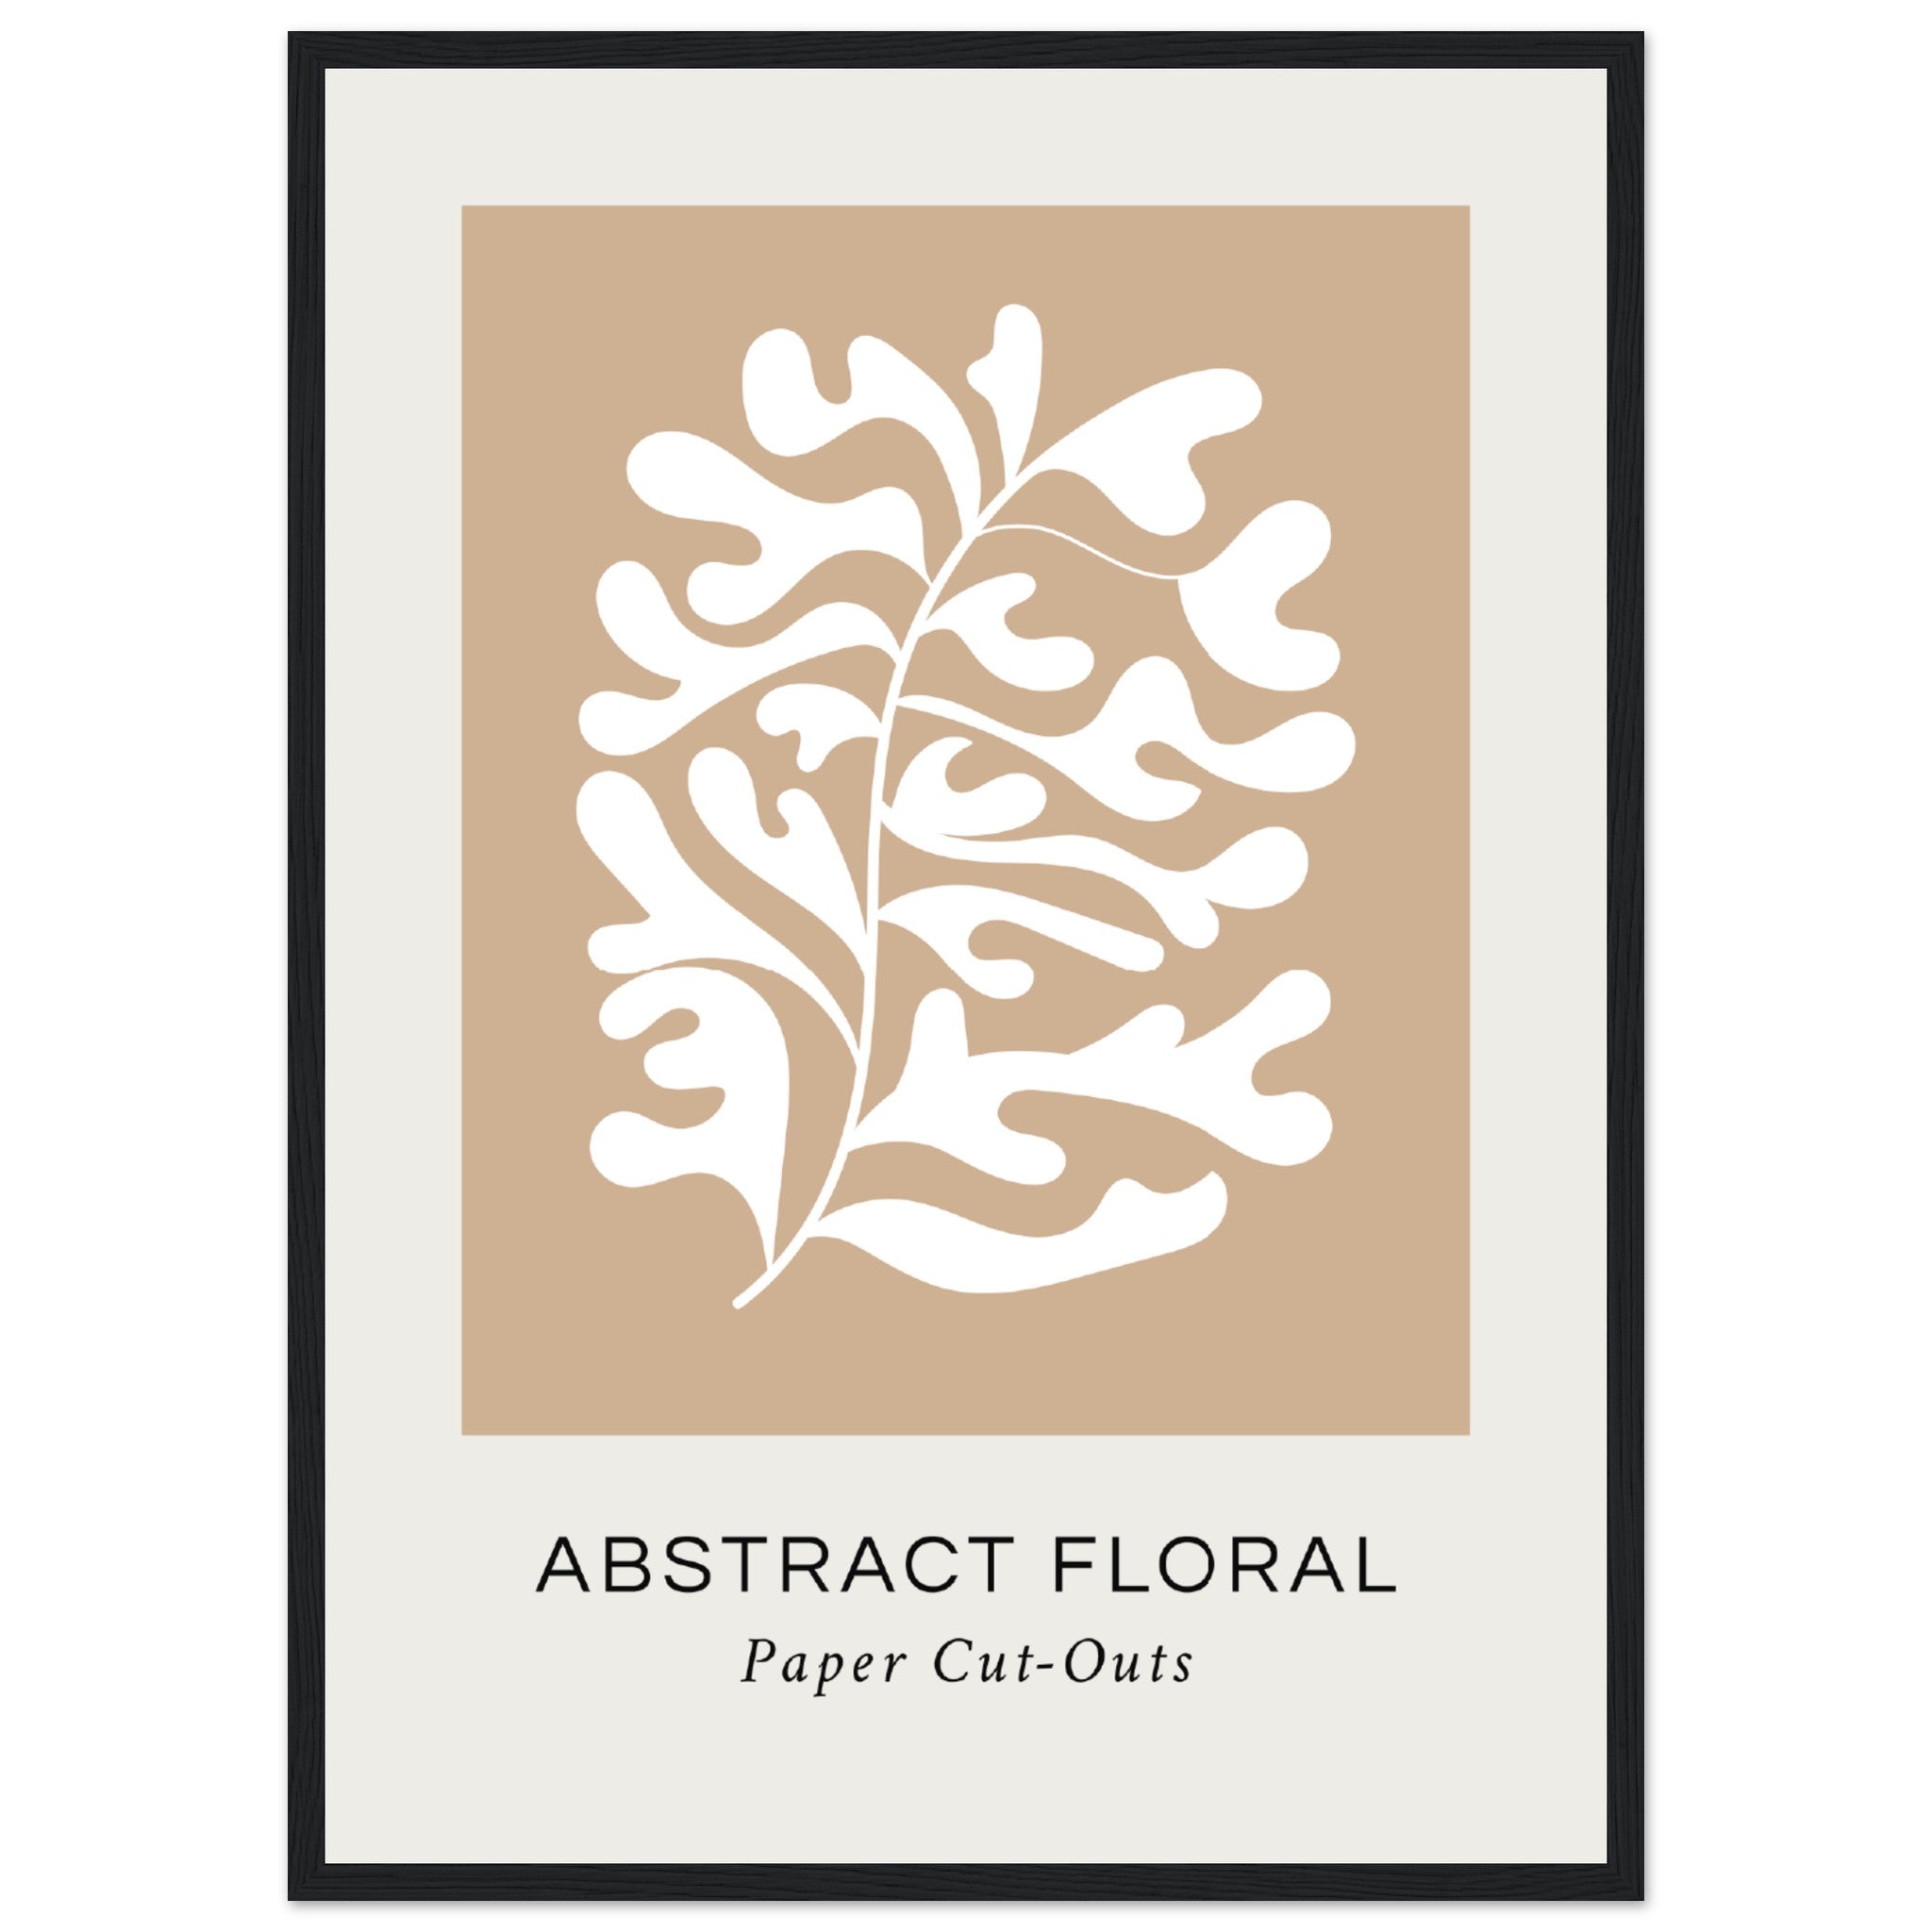 Abstract Floral Paper CutOuts 1 Poster